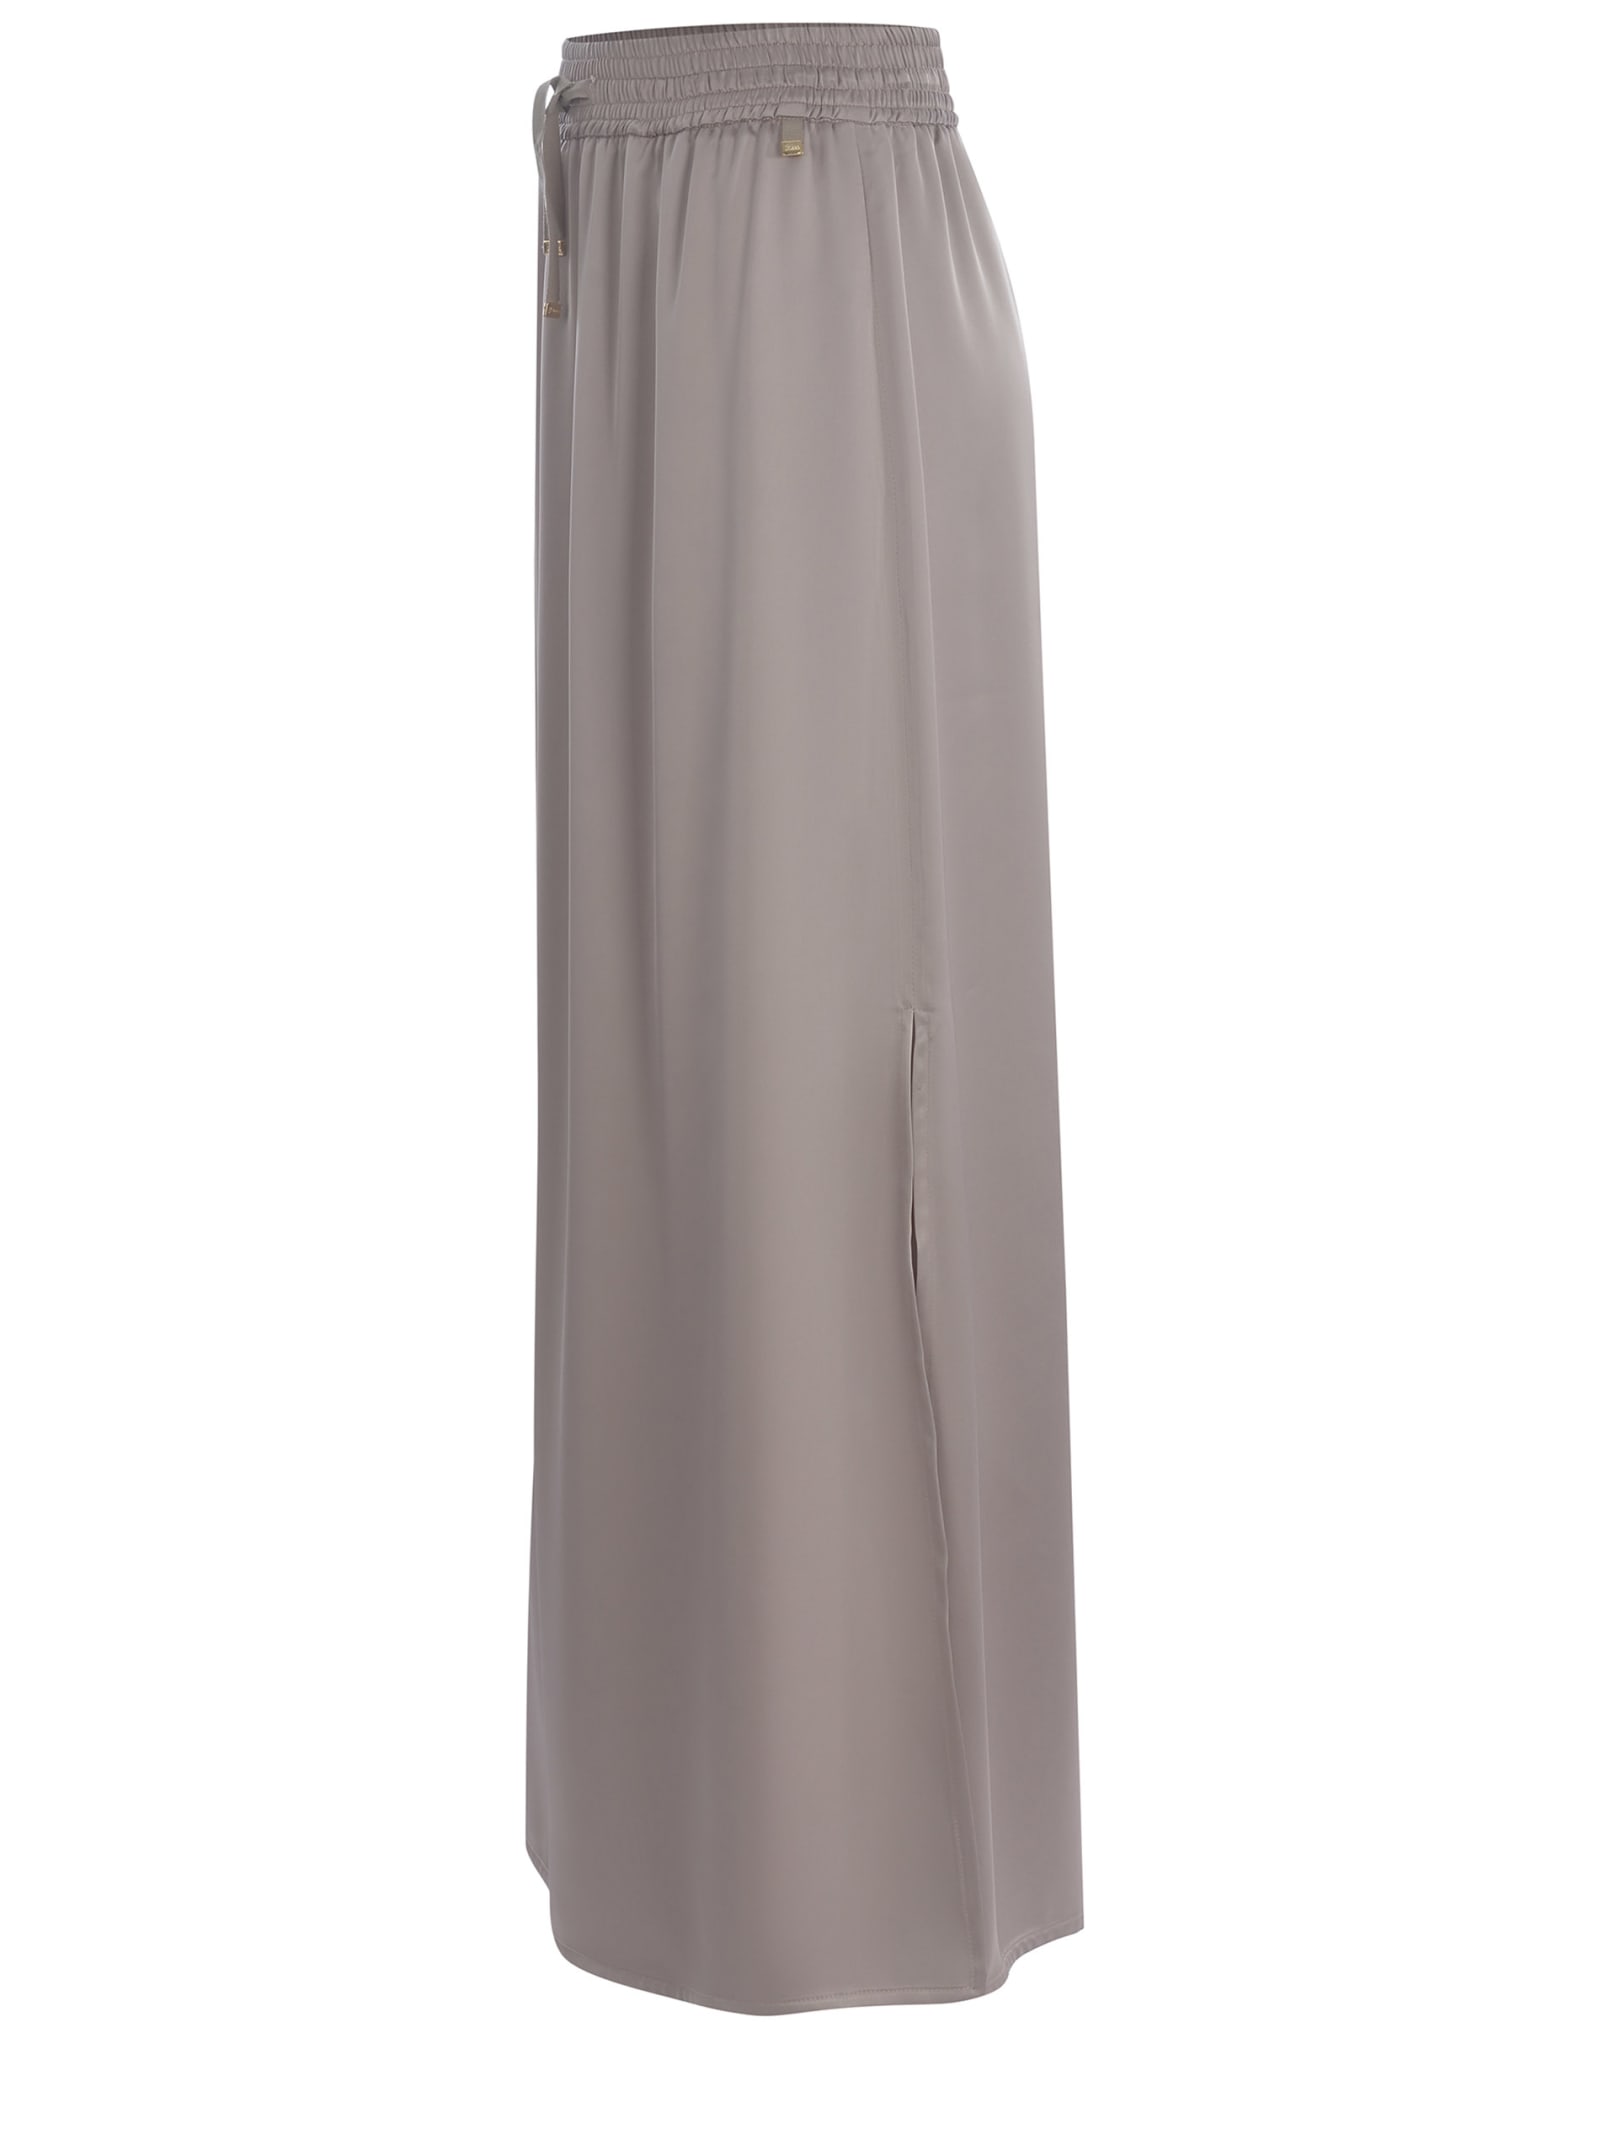 Shop Herno Skirt  Made Of Satin In Chantilly